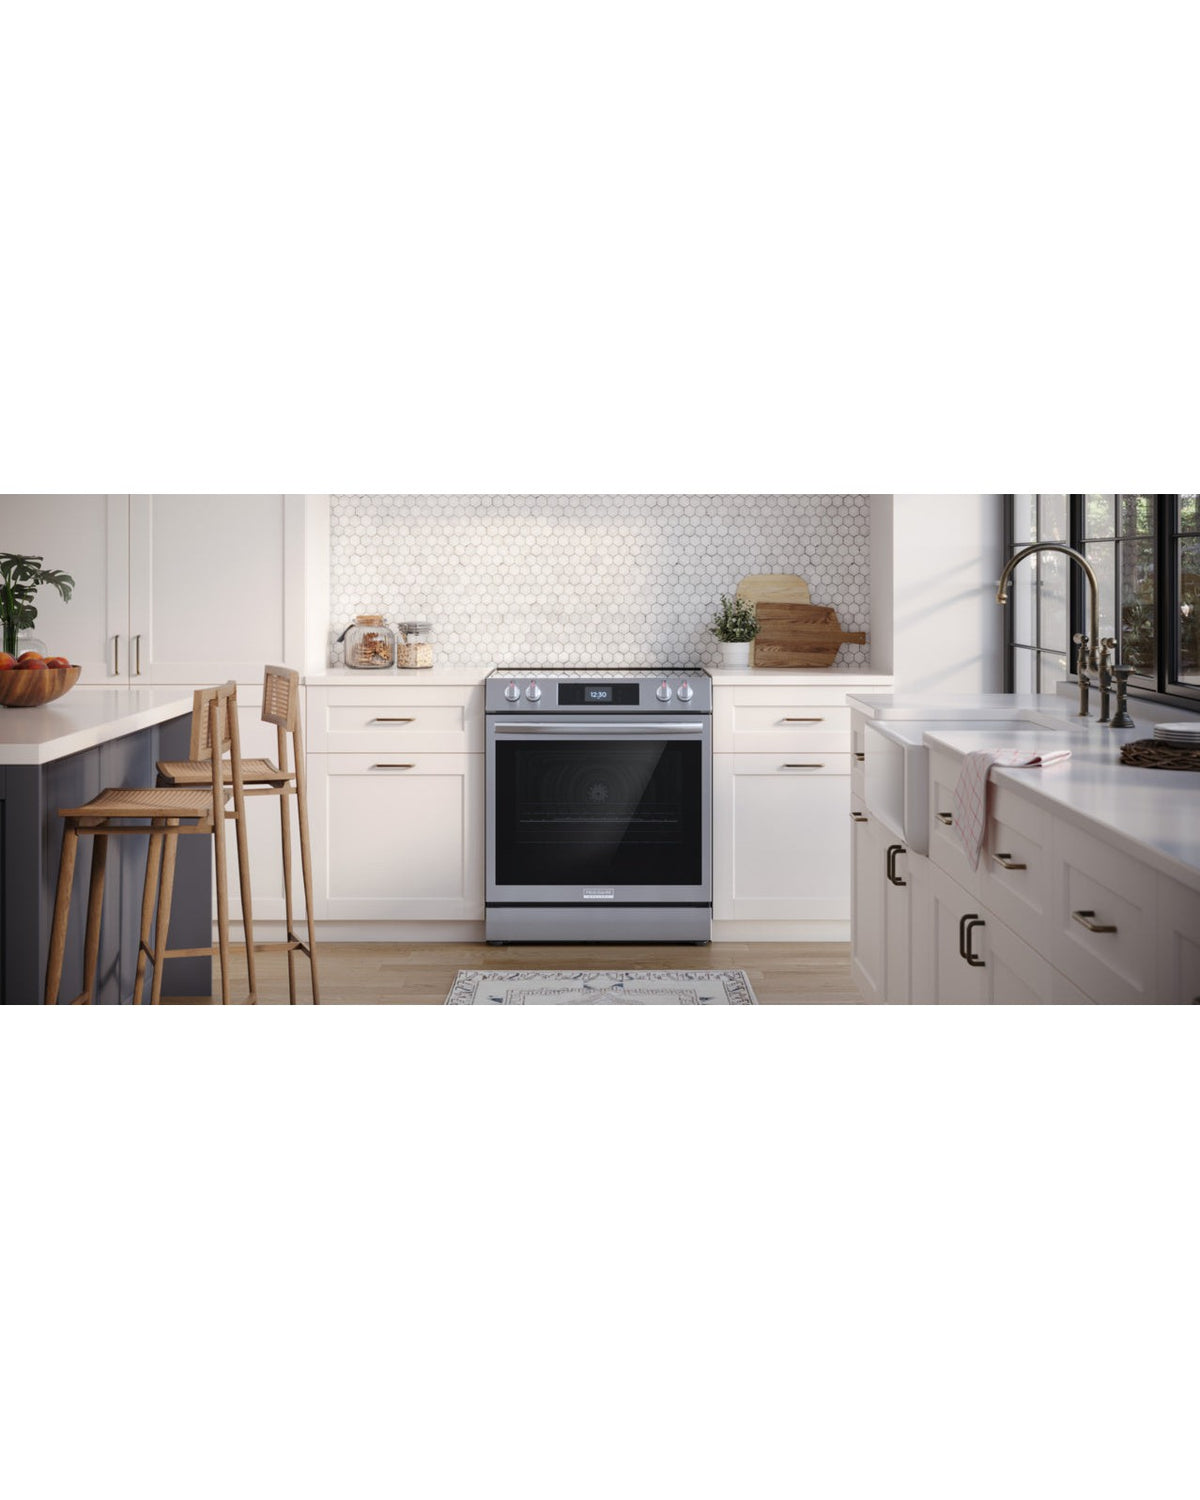 FRIGIDAIRE GCFE3060BF Gallery 30&#39;&#39; Front Control Electric Range with Total Convection